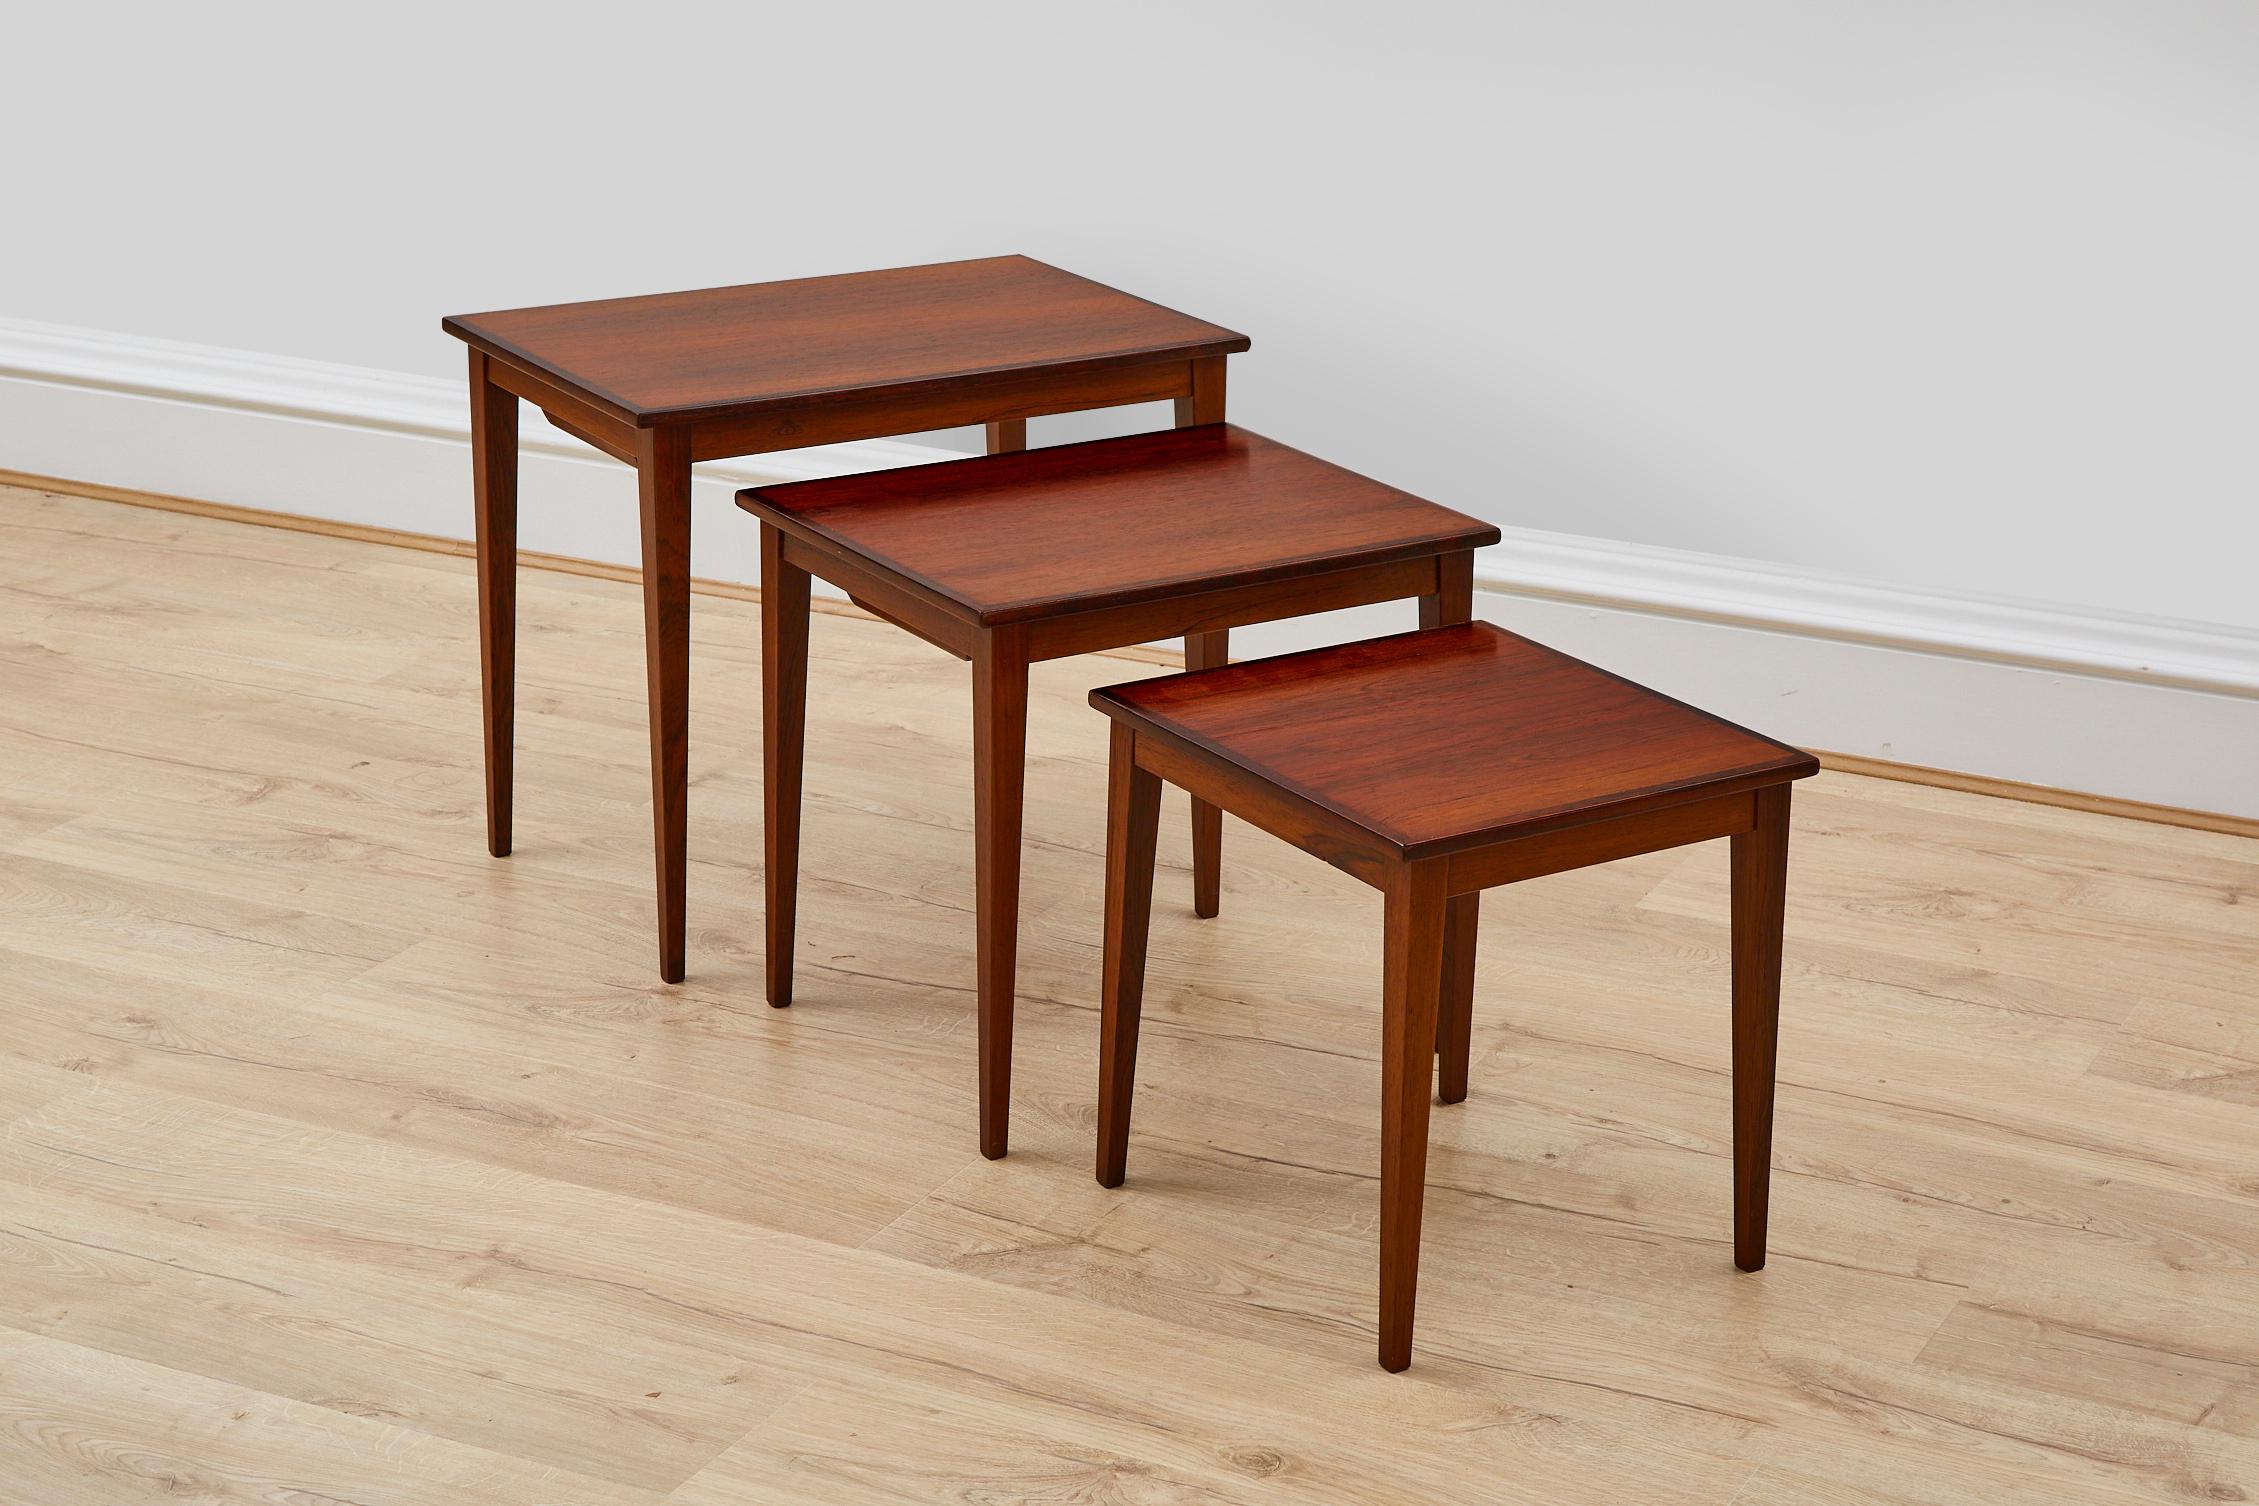 This is a set of 3 rosewood nesting tables from 1960s Demark. The tables have rosewood top and solid rosewood legs and edges. The table tops have been repolished. All 3 tables are in very good vintage condition.